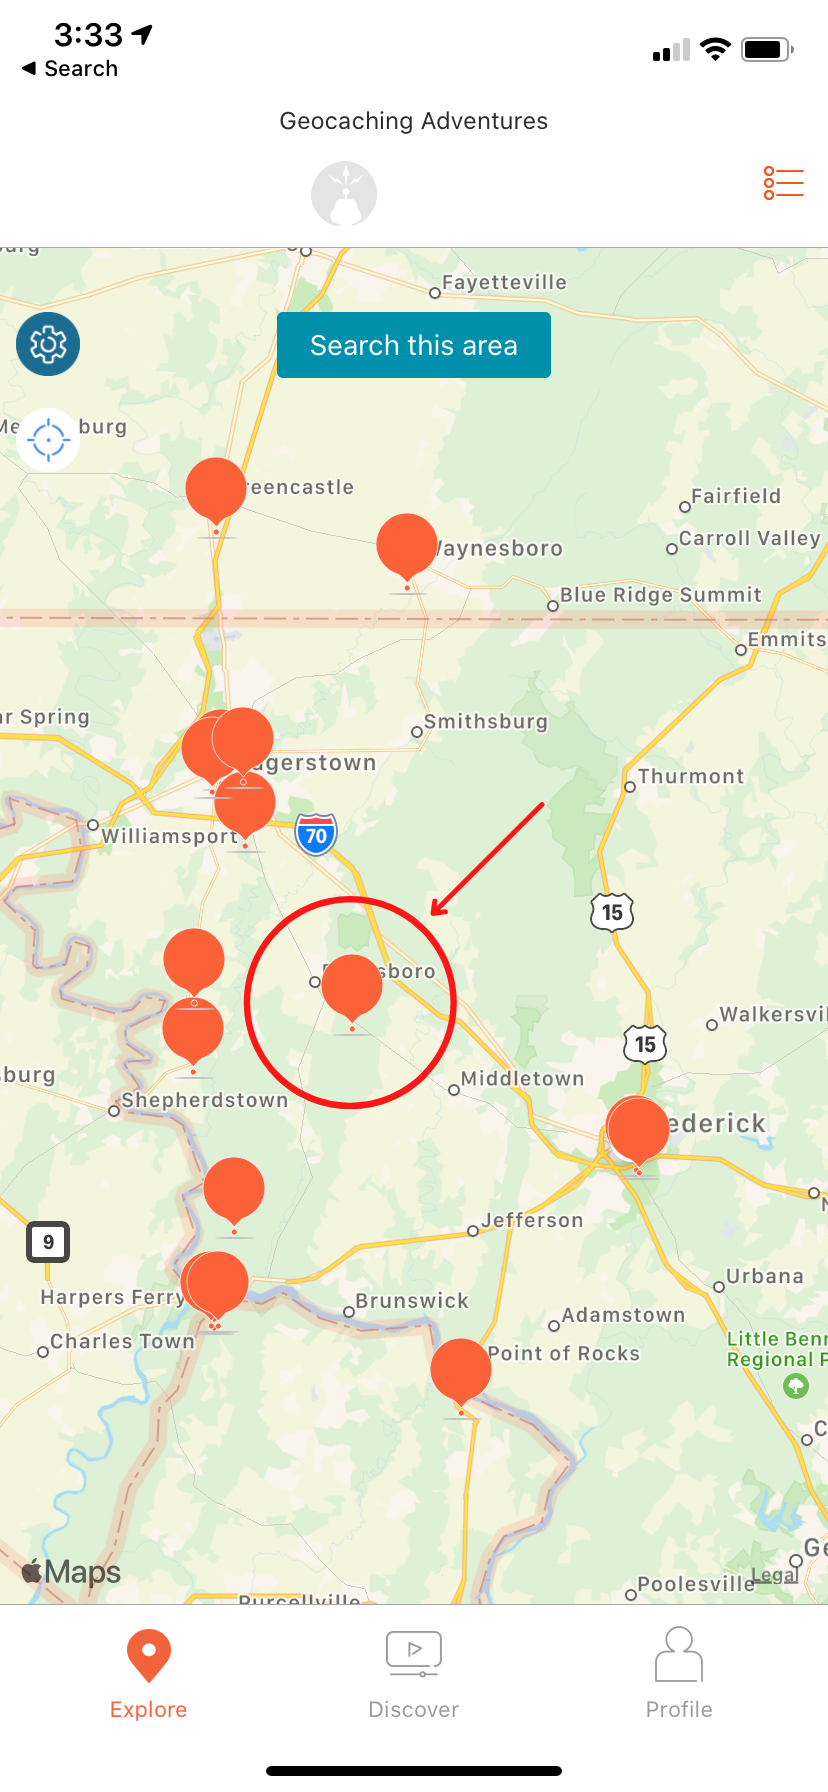 Adventure Lab app map showing different locations with Adventure Labs, the location closest to Boonsboro is circled in red with a red arrow pointing at it.